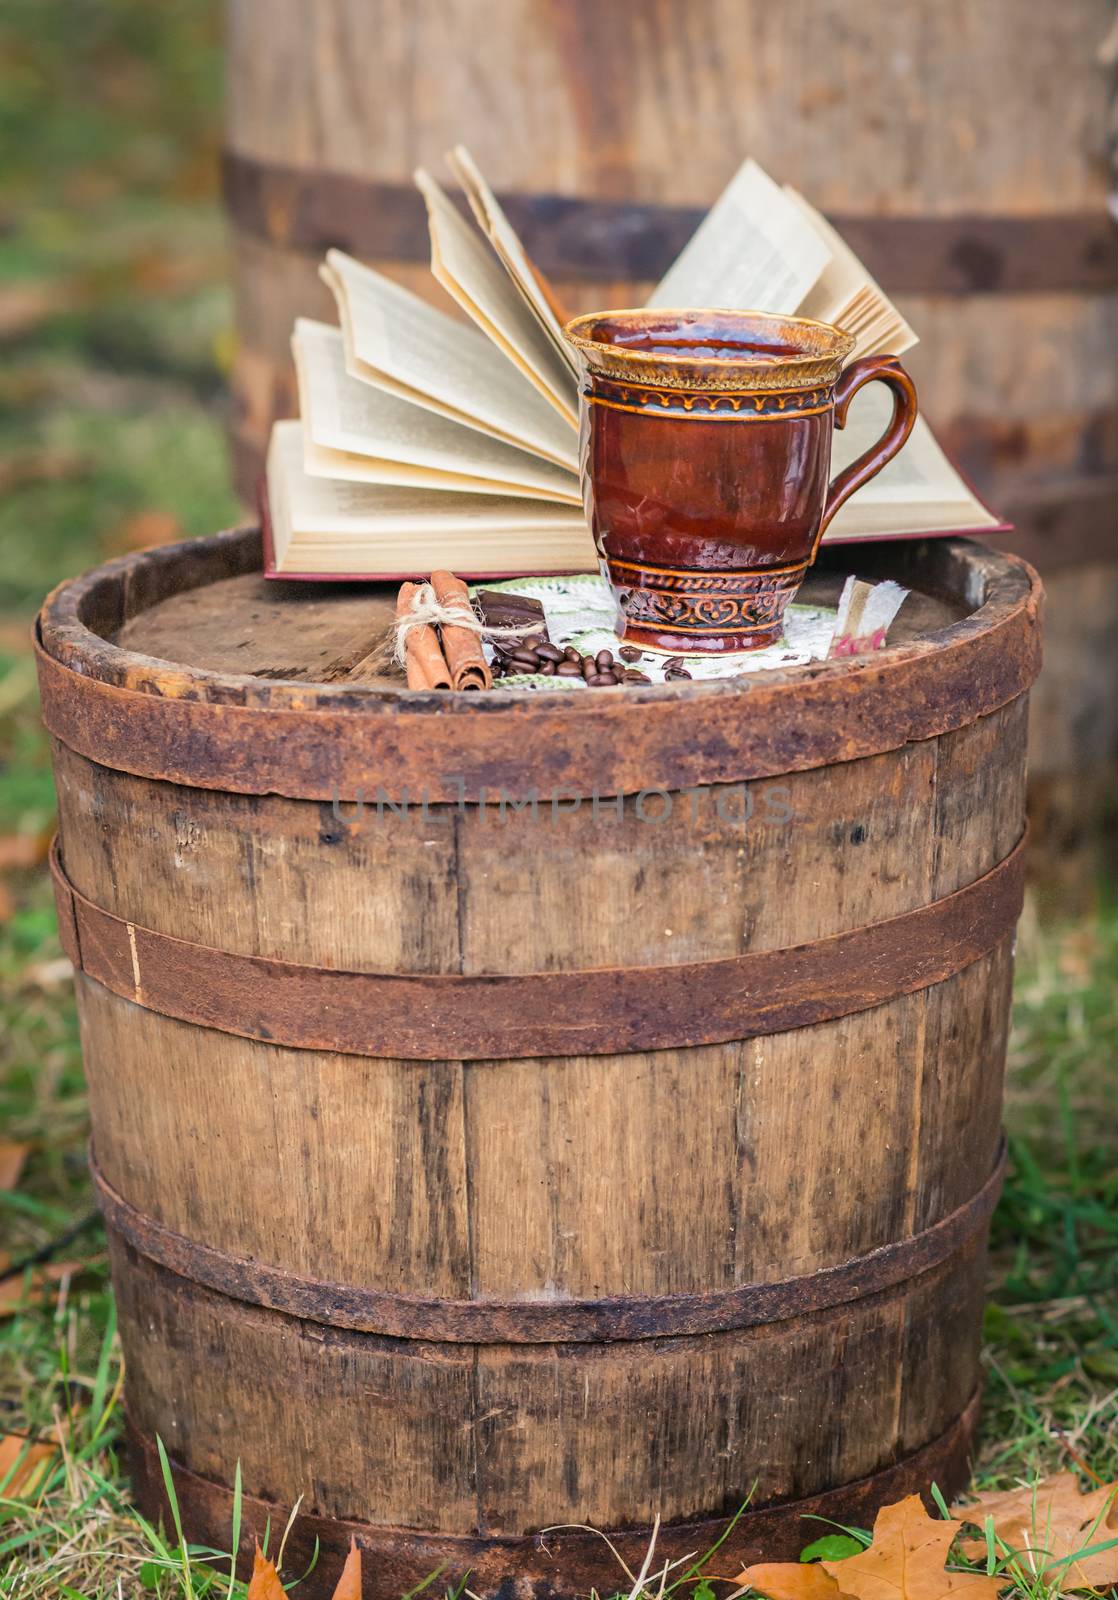 still life with cinnamon sticks, coffee beans and coffee cup on the old oak barrel in the garden autumn